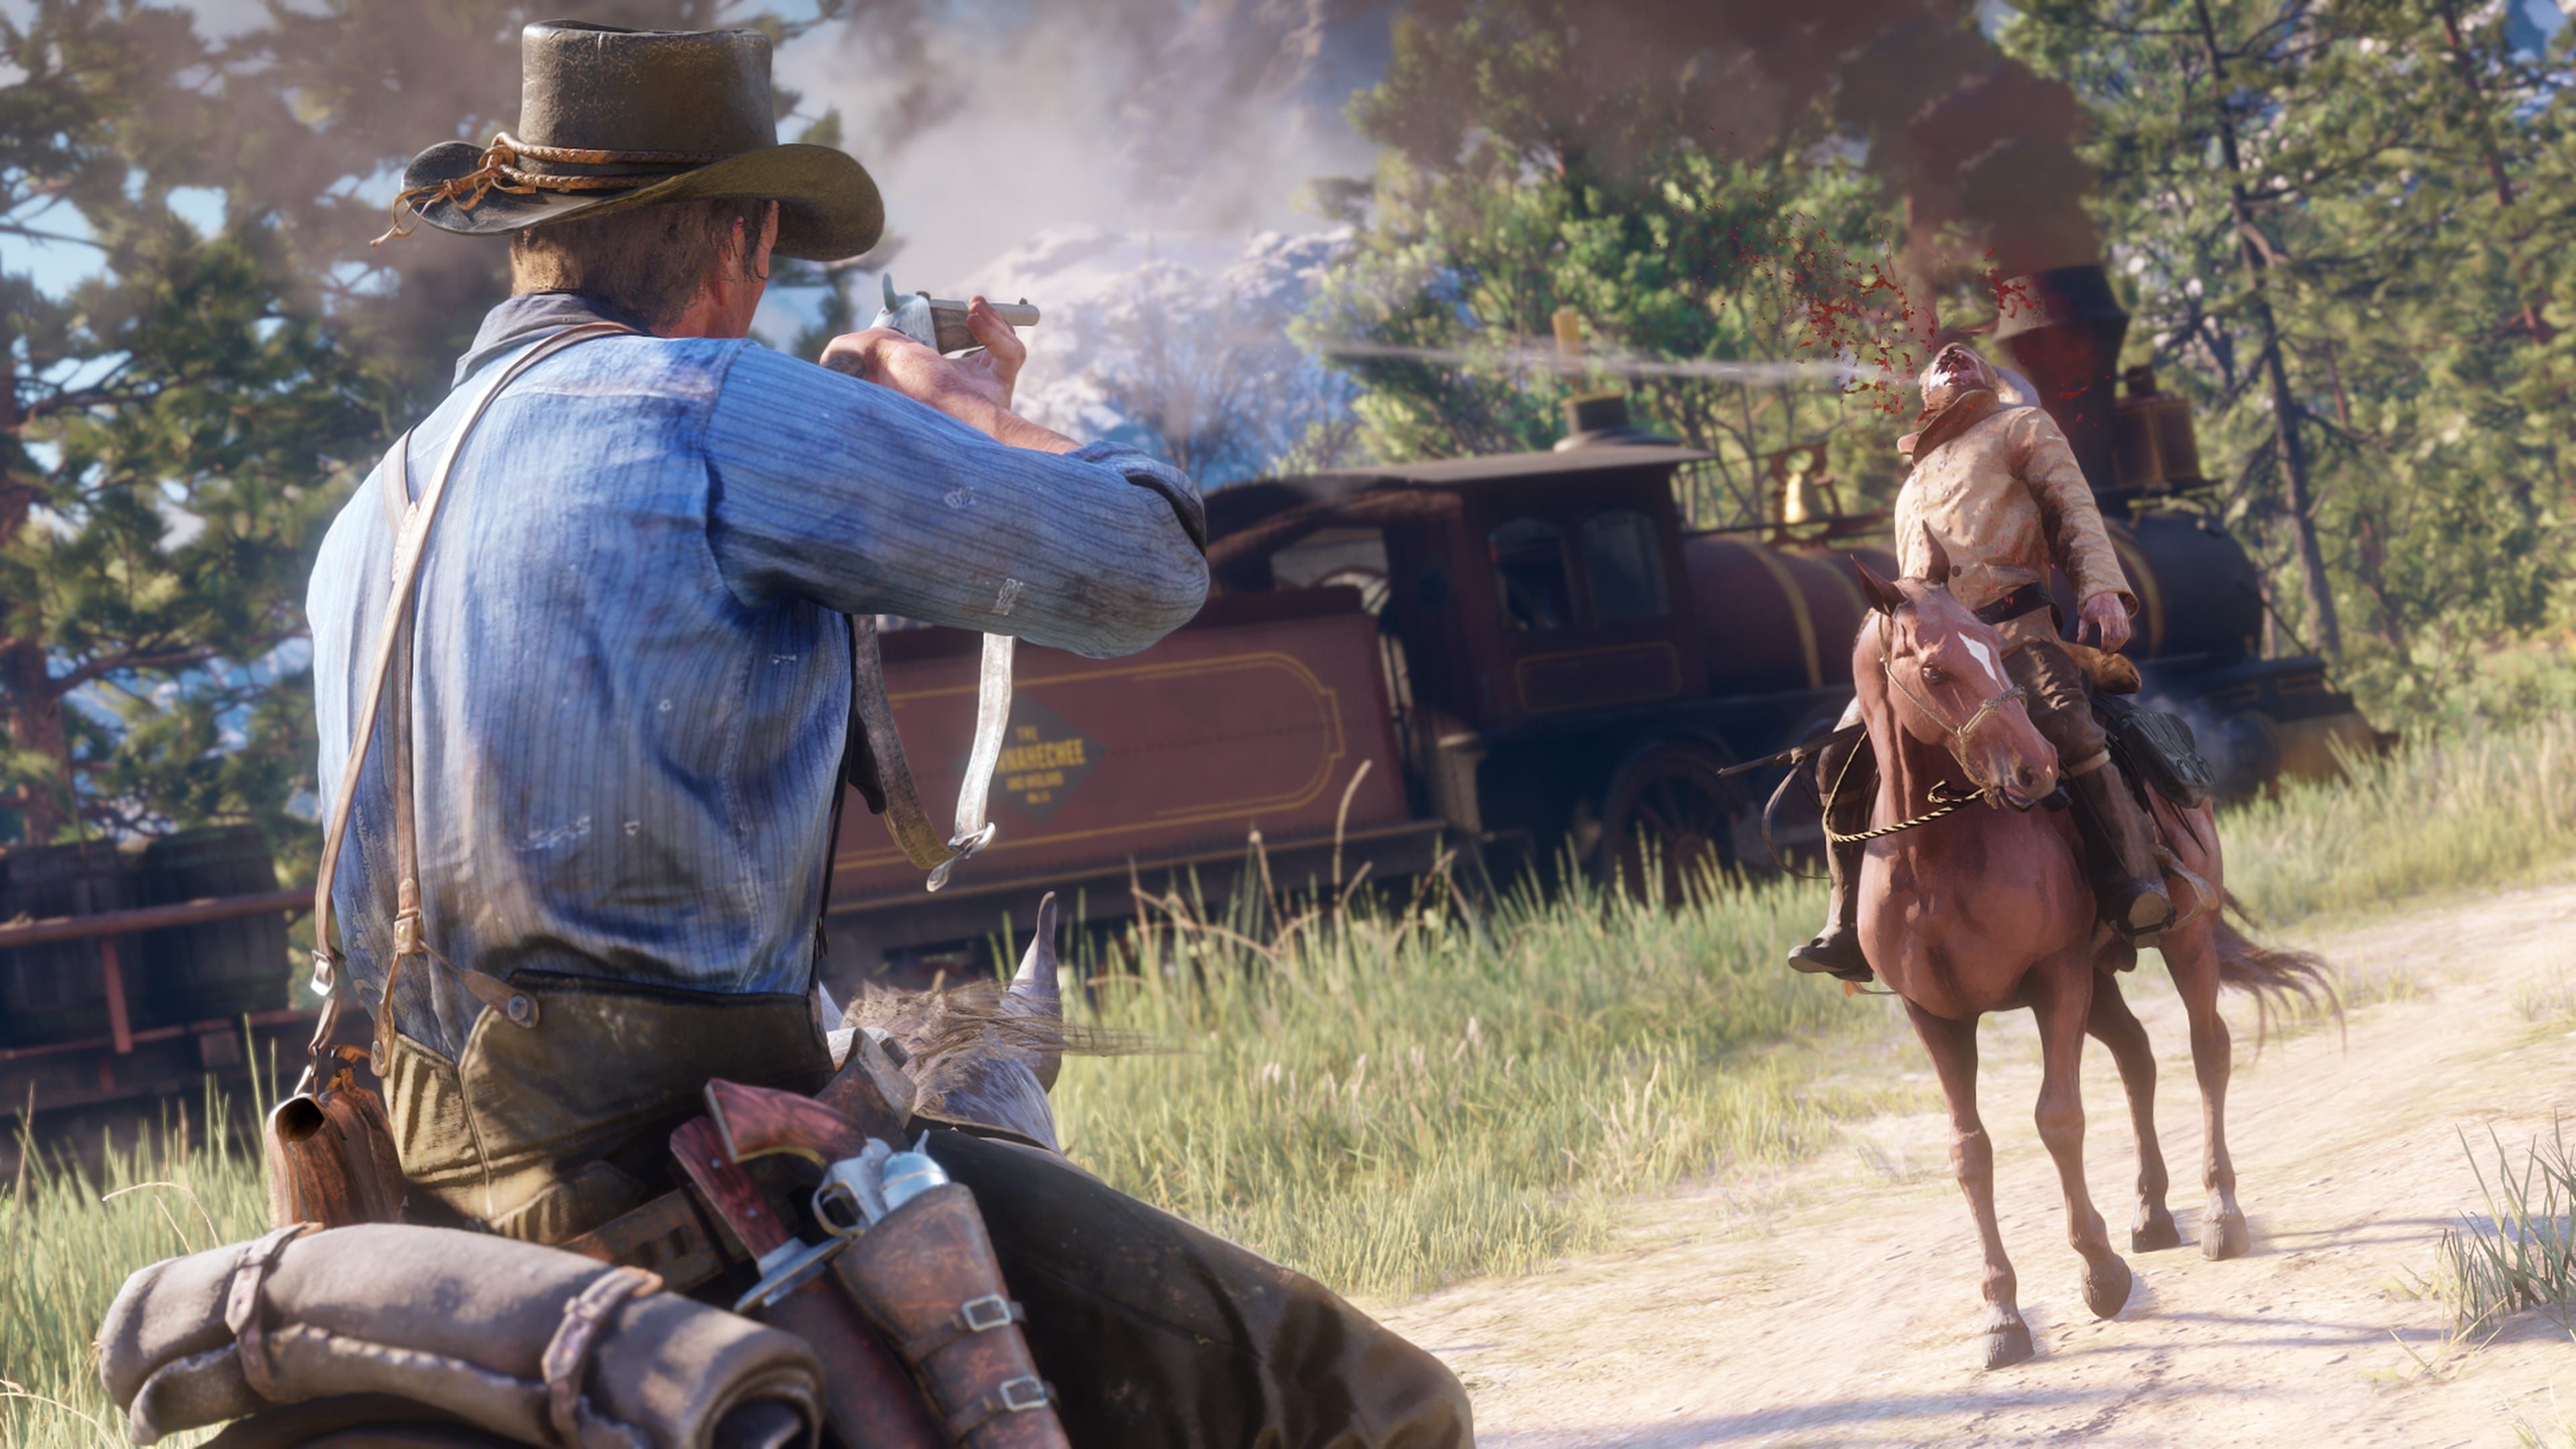 Red Dead Redemption 2 Development Resulted in "100-Hour of Work for Rockstar [UPDATED]